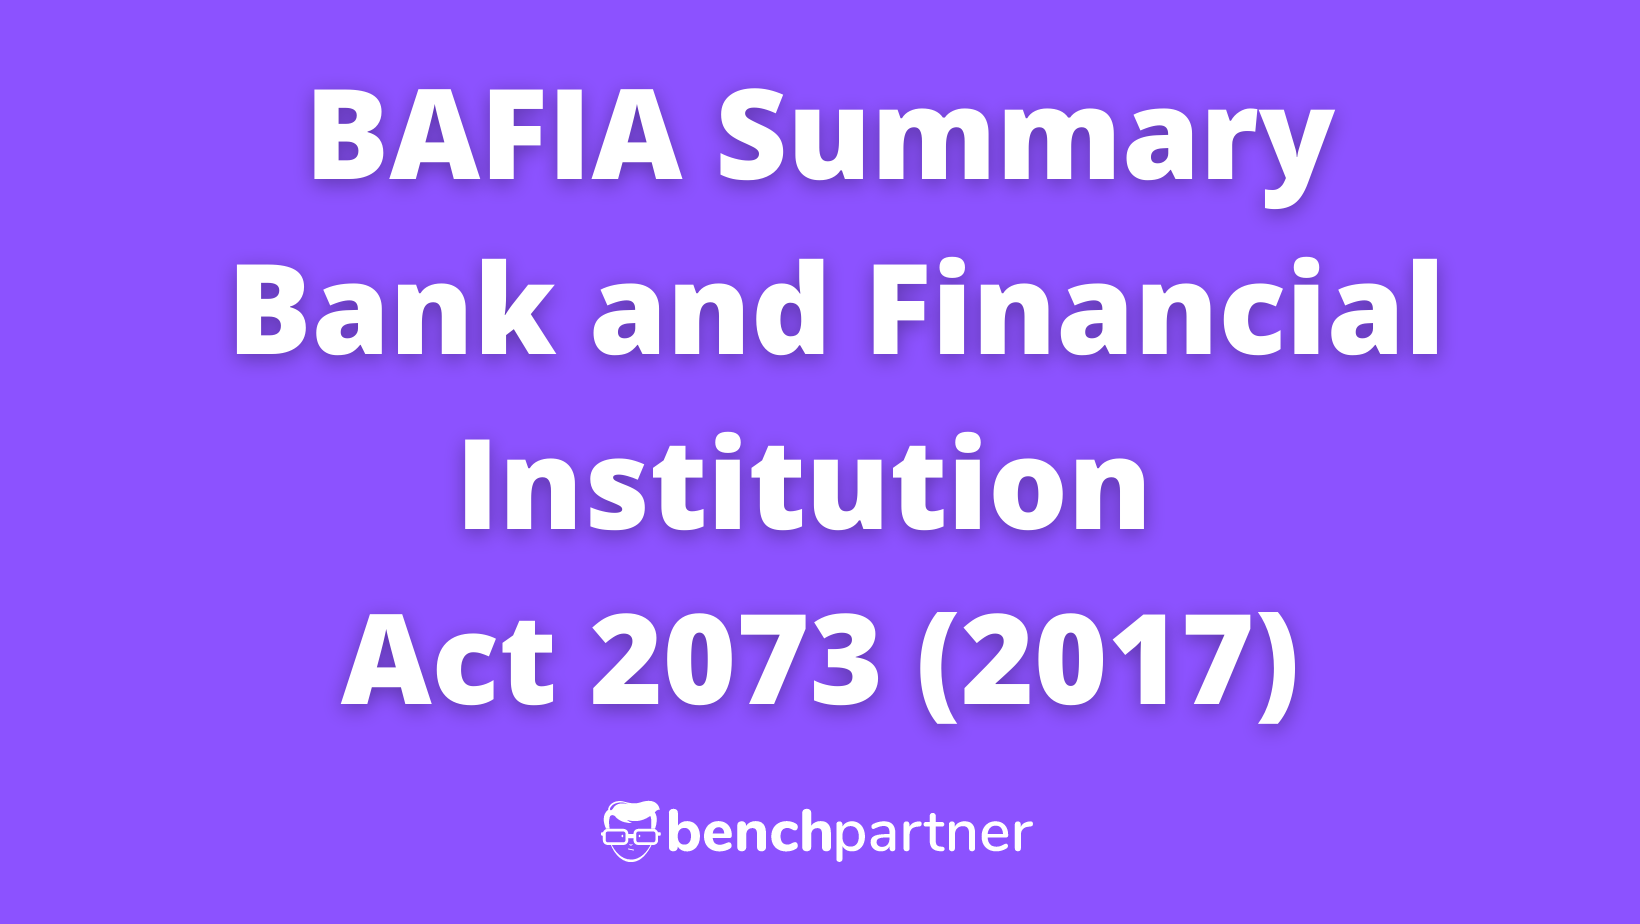 BAFIA Summary - Bank and Financial Institution Act 2073 (2017)